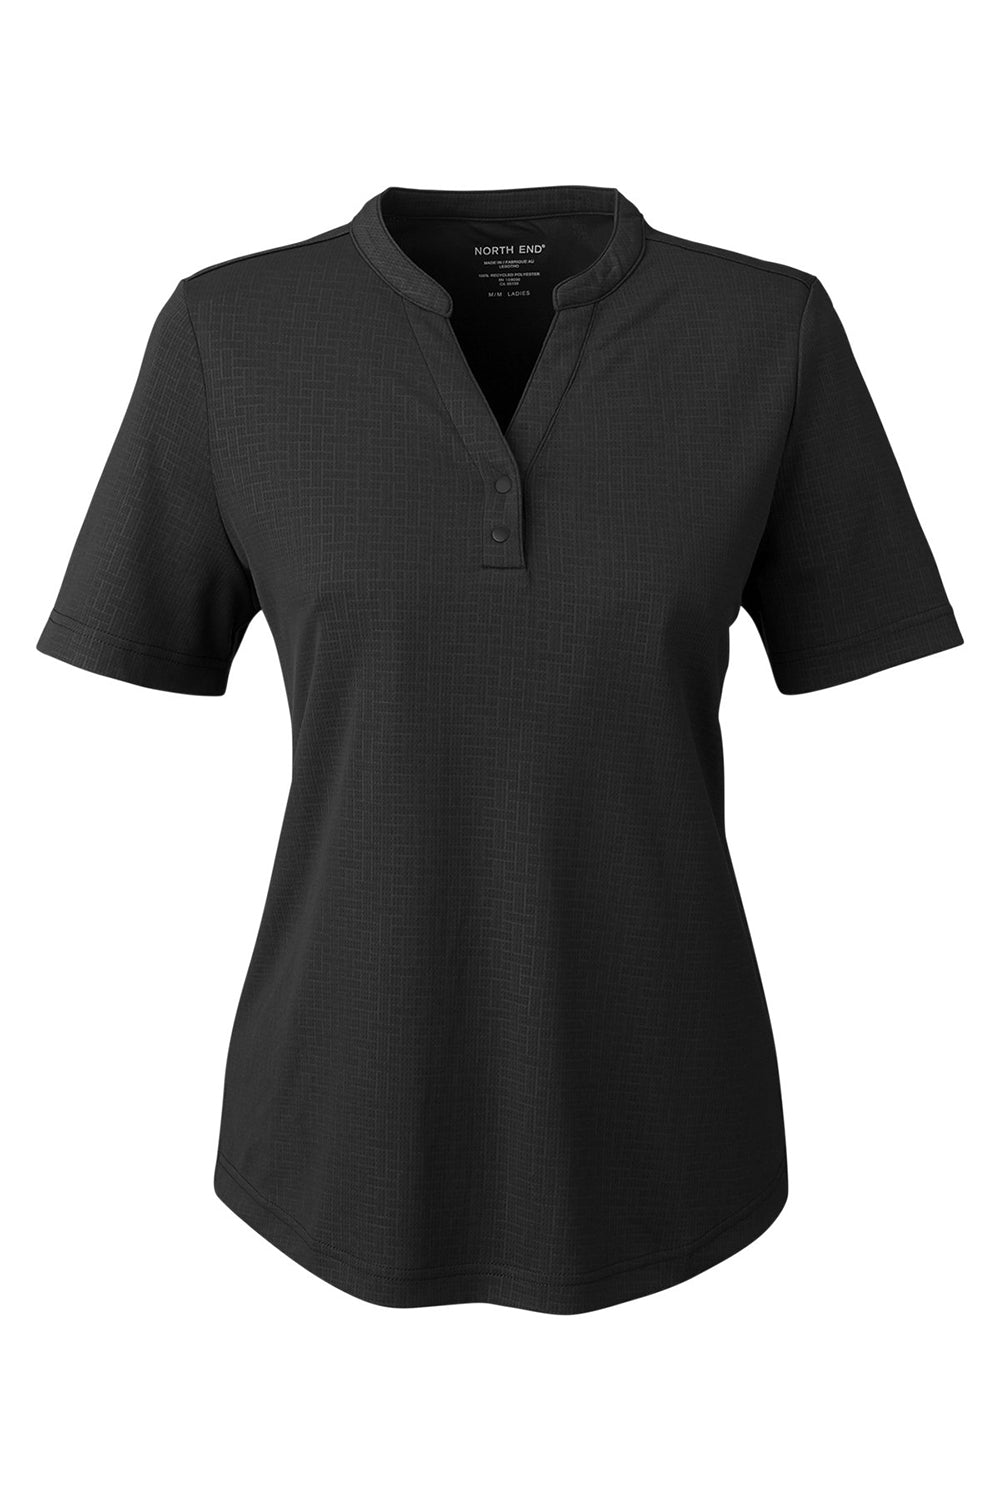 North End NE102W Womens Replay Recycled Short Sleeve Polo Shirt Black Flat Front